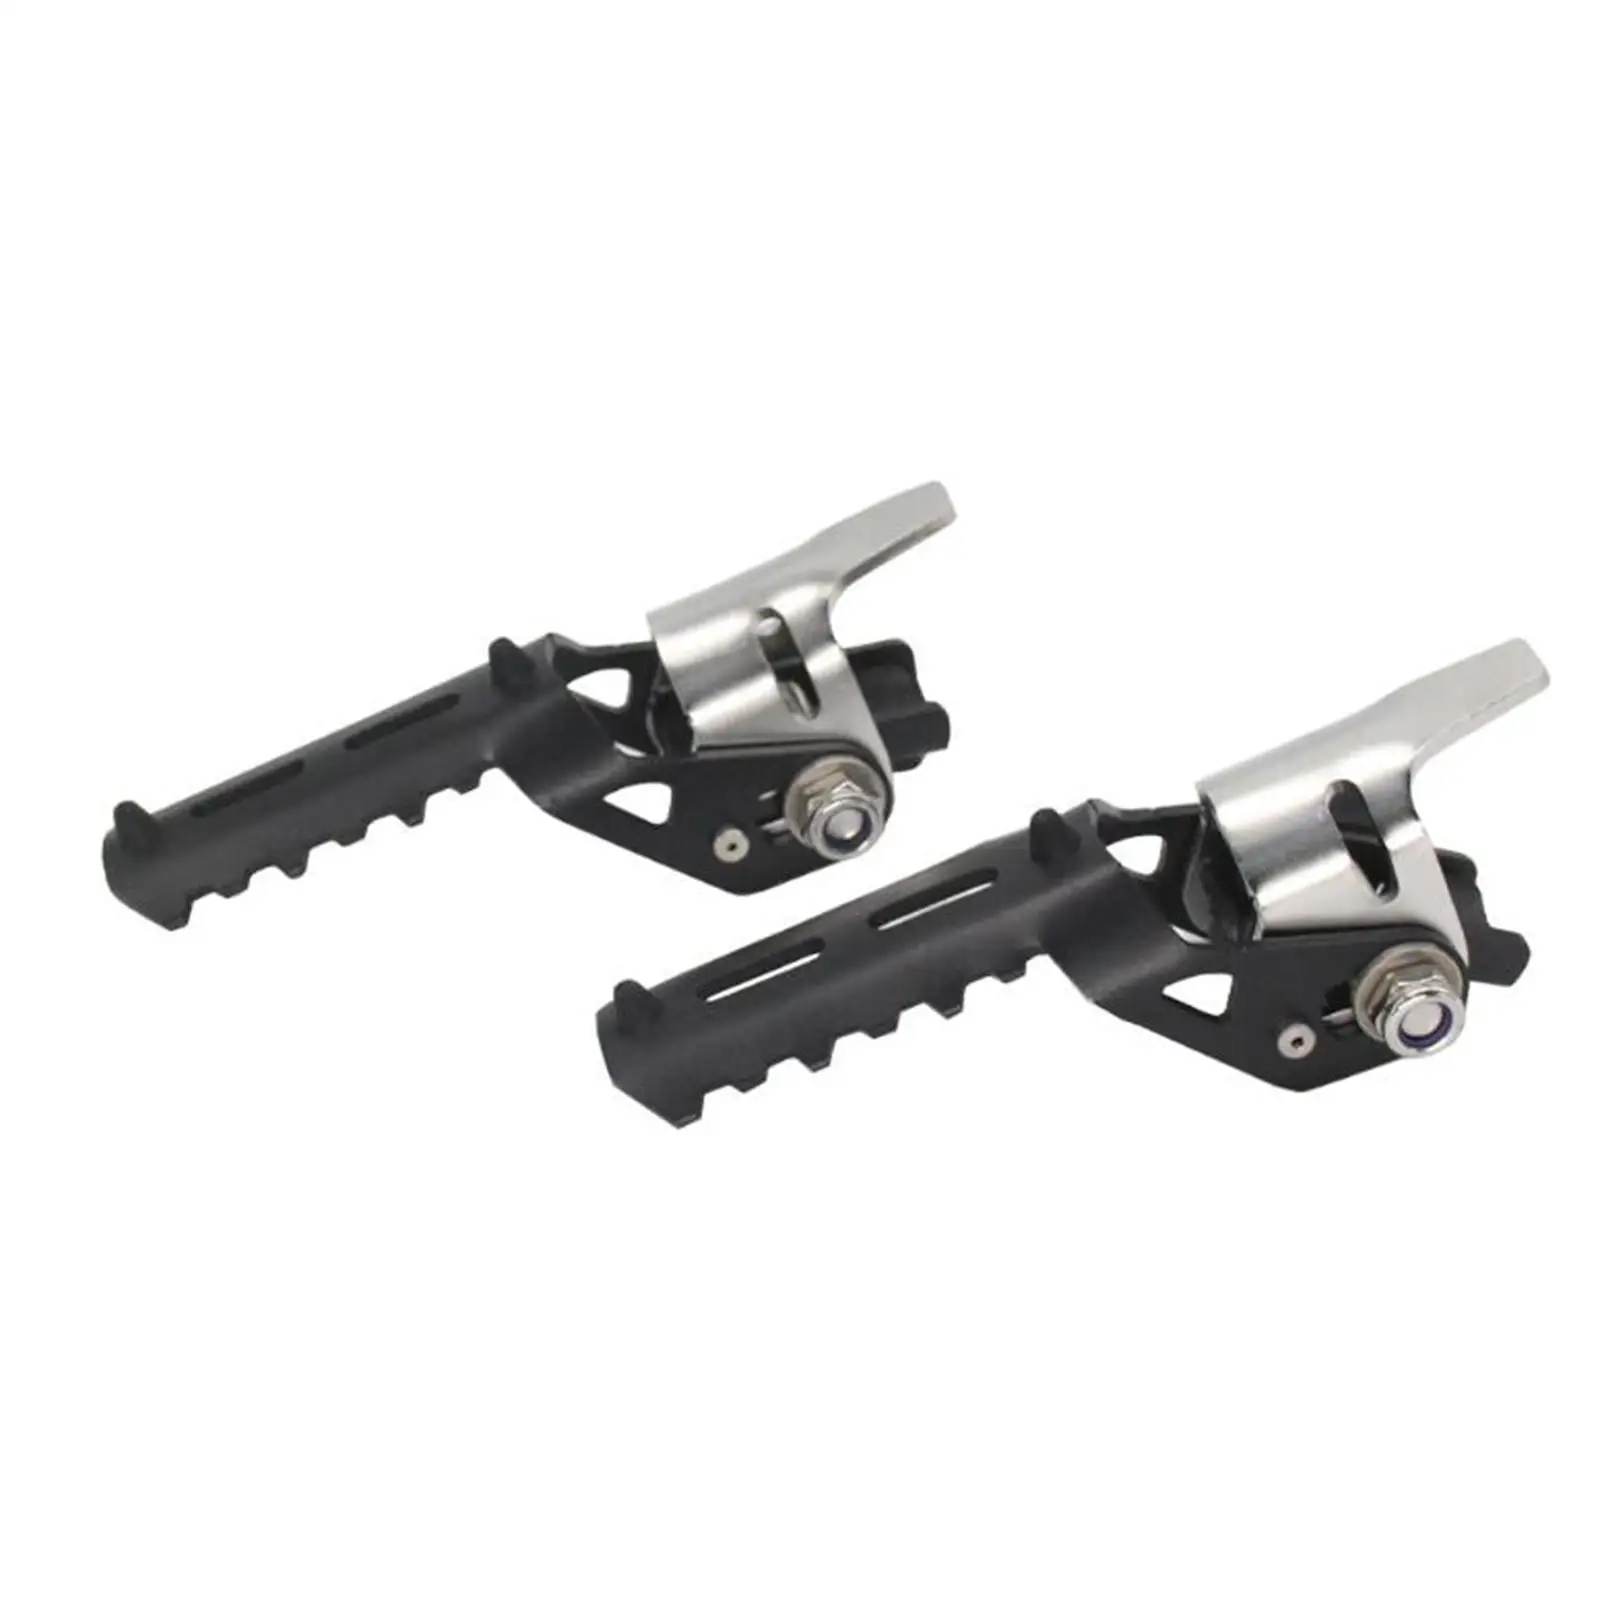 Front Foot Pegs Diameter Tube 22-25mm for BMW R1250GS F850GS C400x